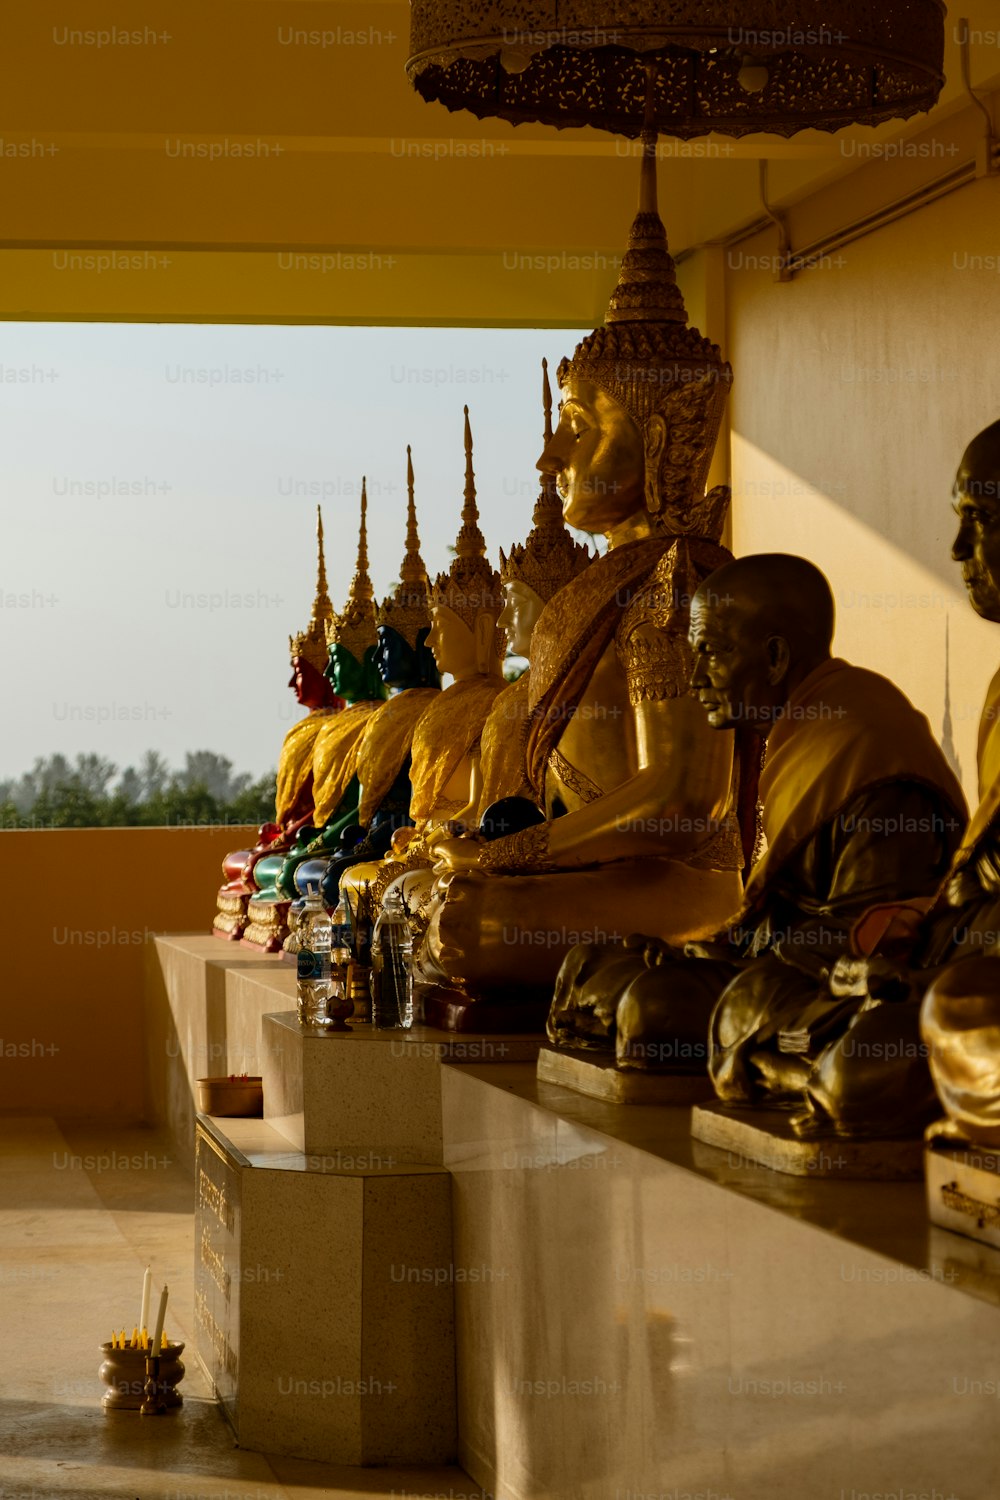 a row of buddha statues sitting on top of a counter